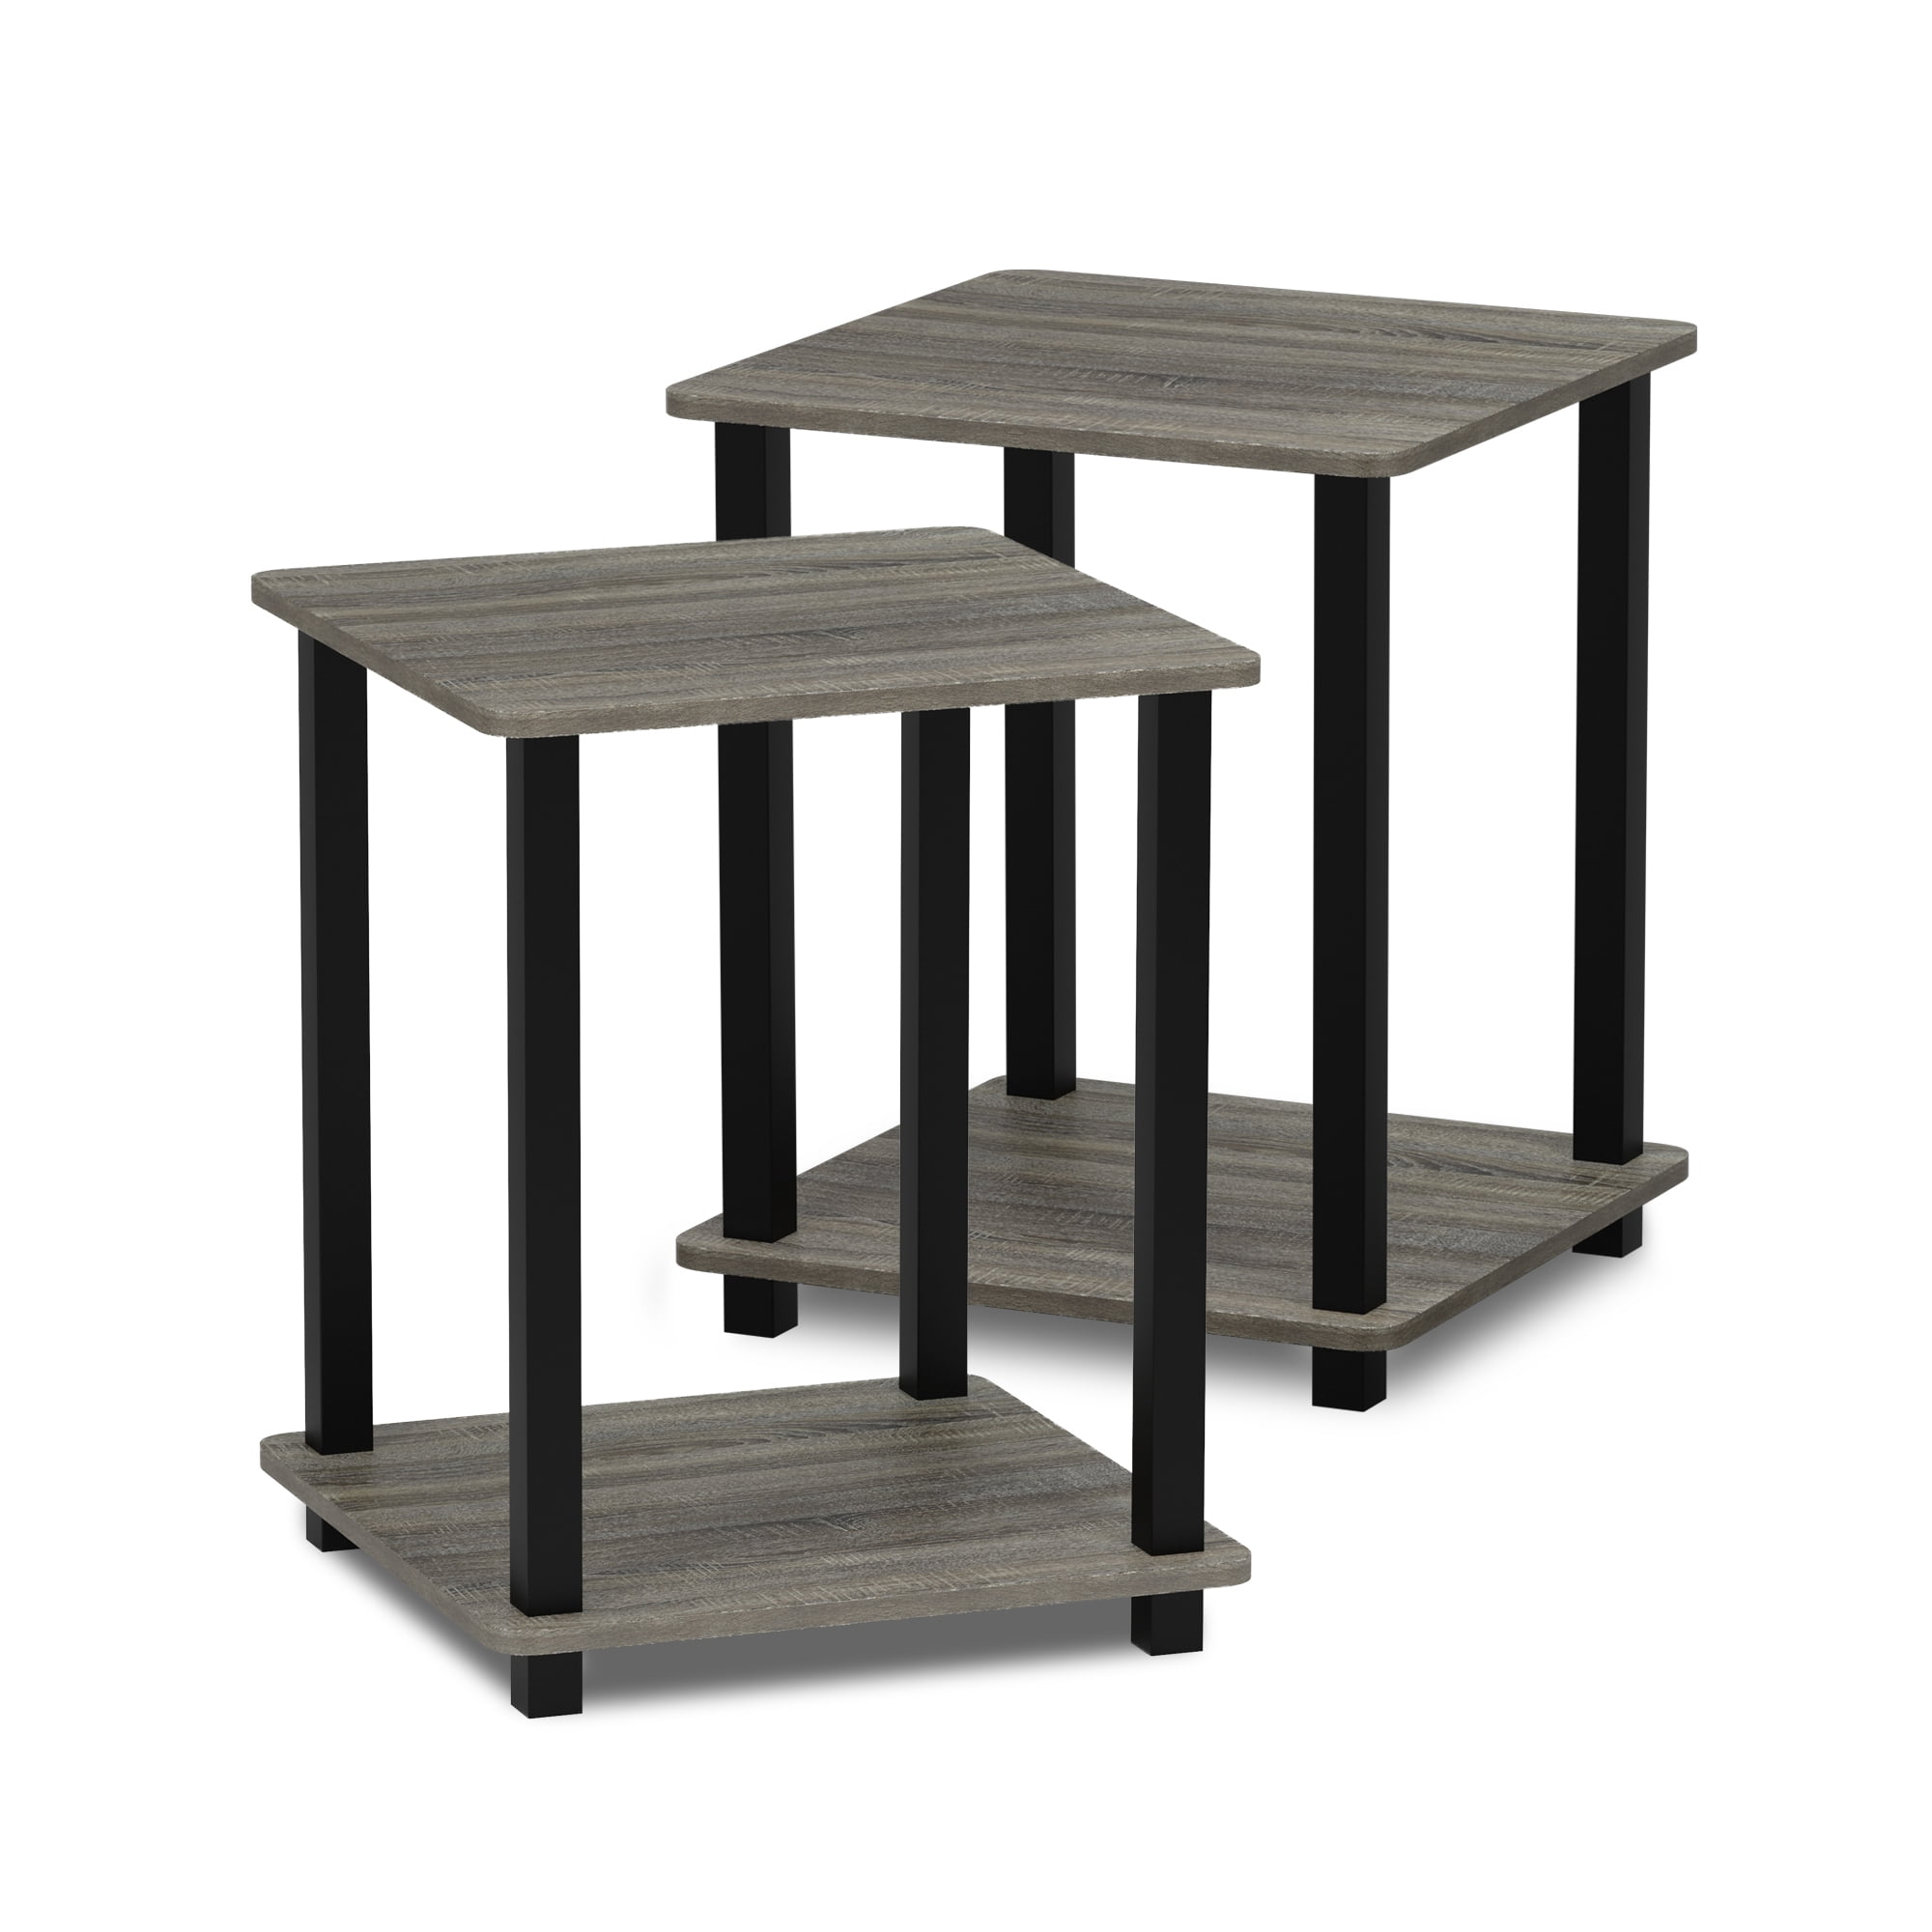 Set of 2 Espresso Petite Furinno 2-11157EX End Table Bedroom Night Stand 